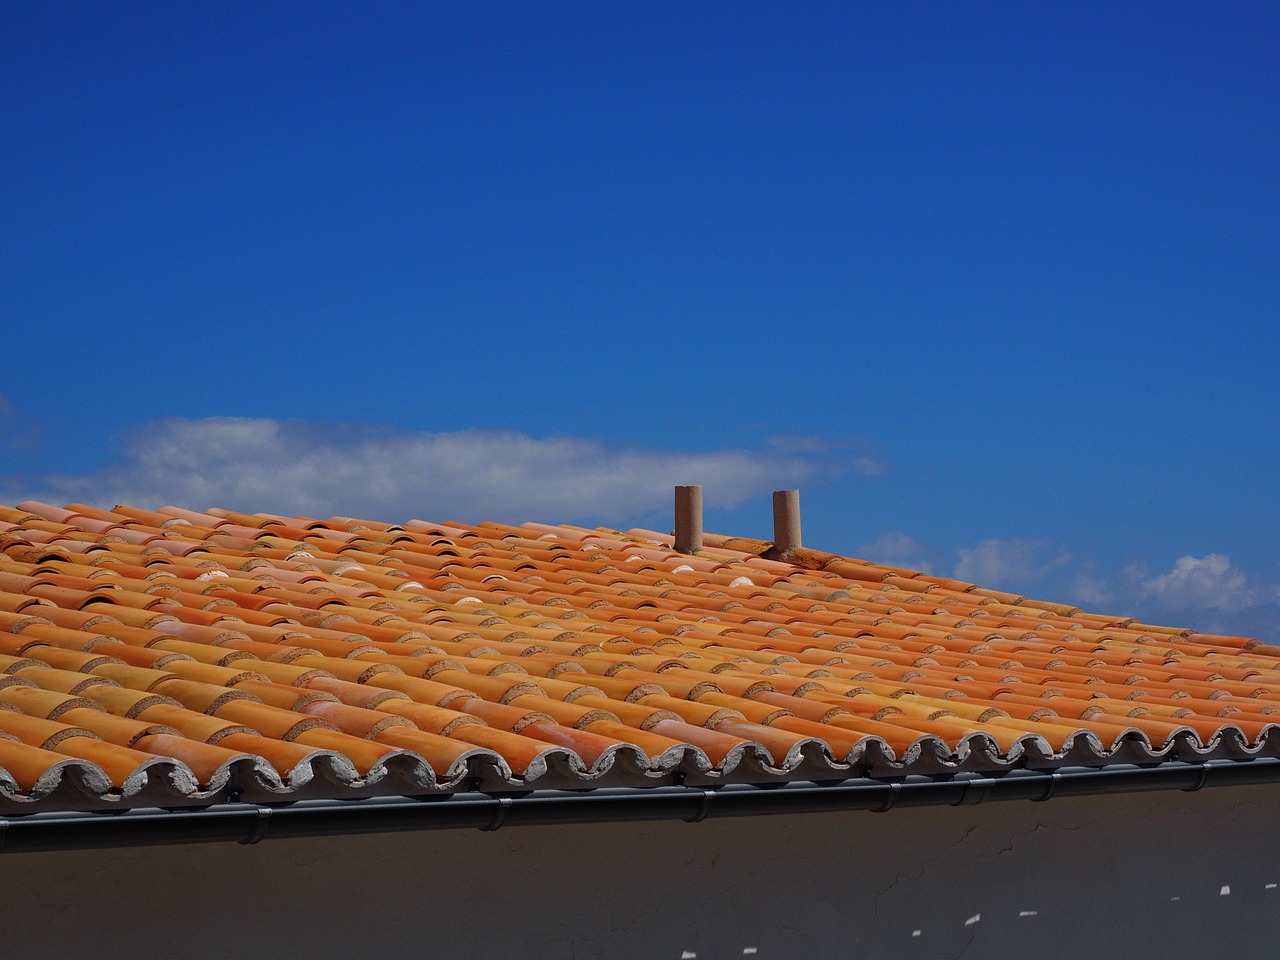 roof,roofing,flat roof,red,house roof,tile,mediterranean,architecture,free pictures, free photos, free images, royalty free, free illustrations, public domain